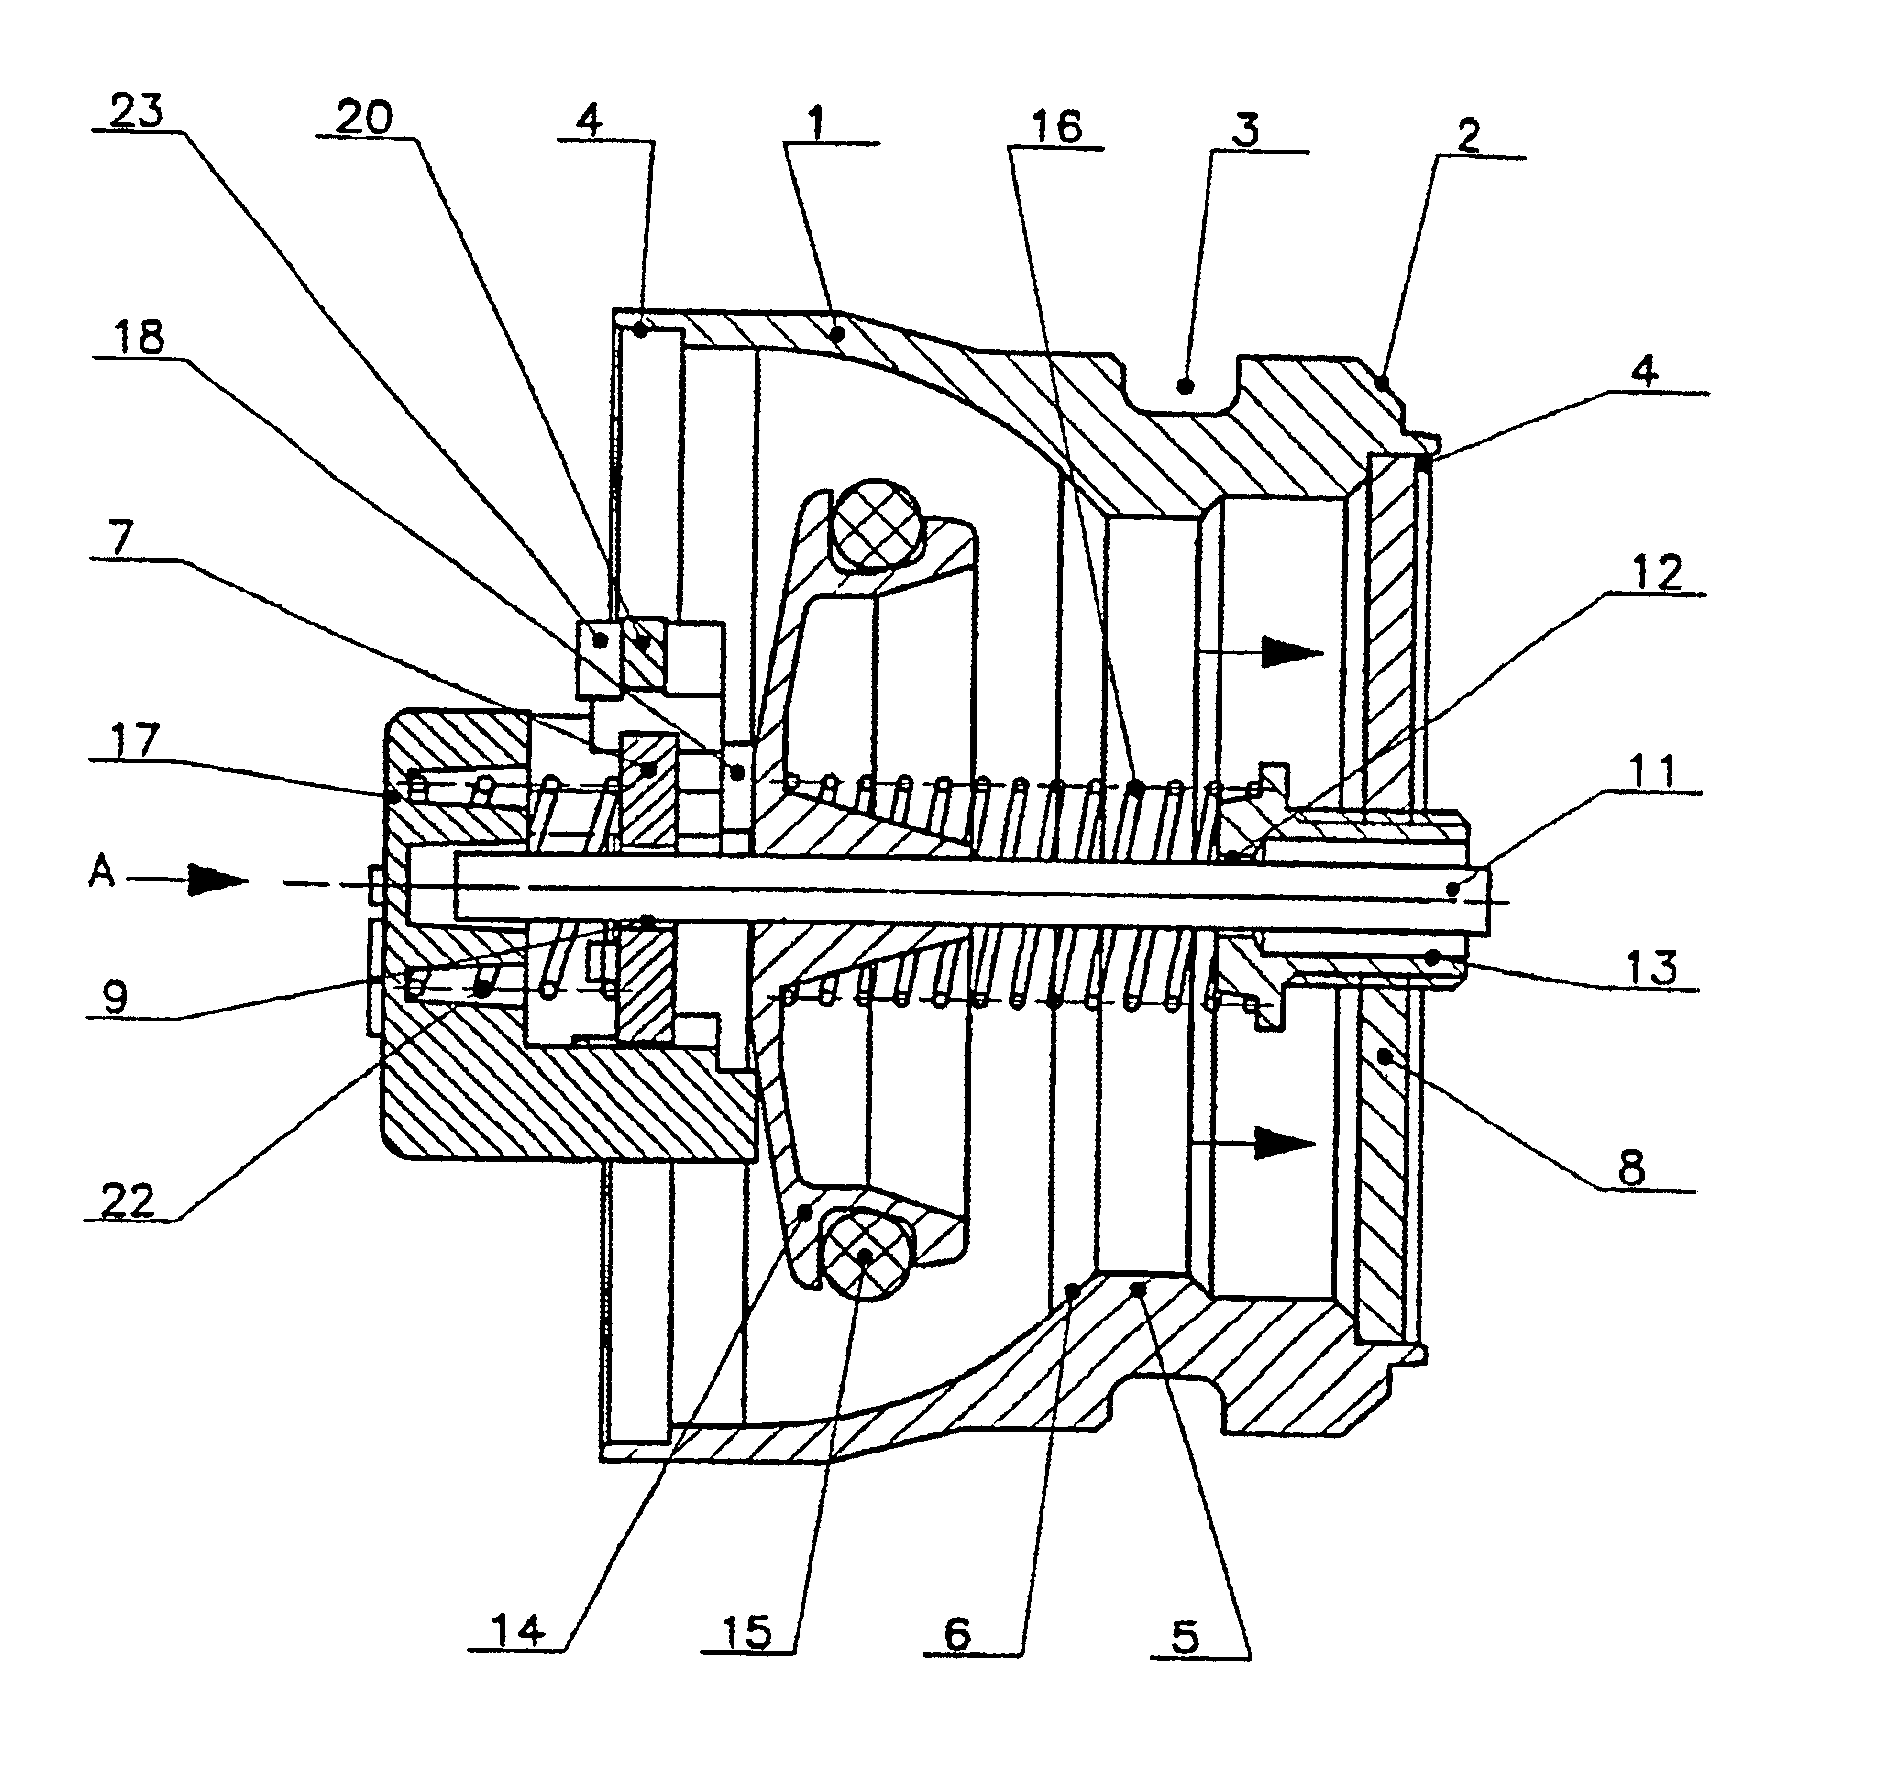 Gas flow monitoring device